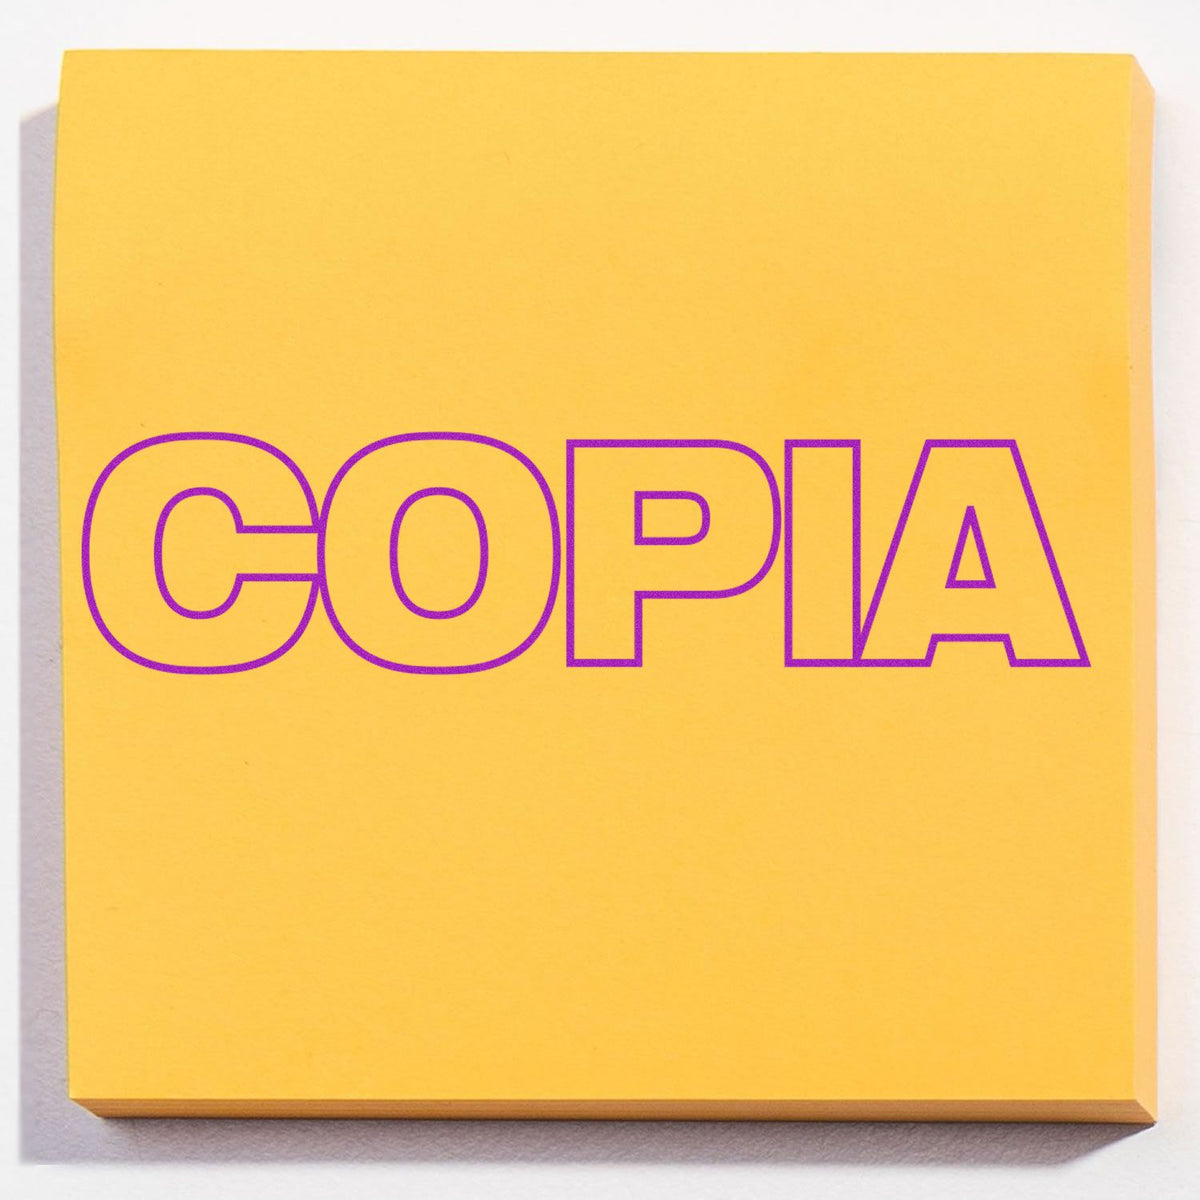 Large Self-Inking Copia Stamp In Use